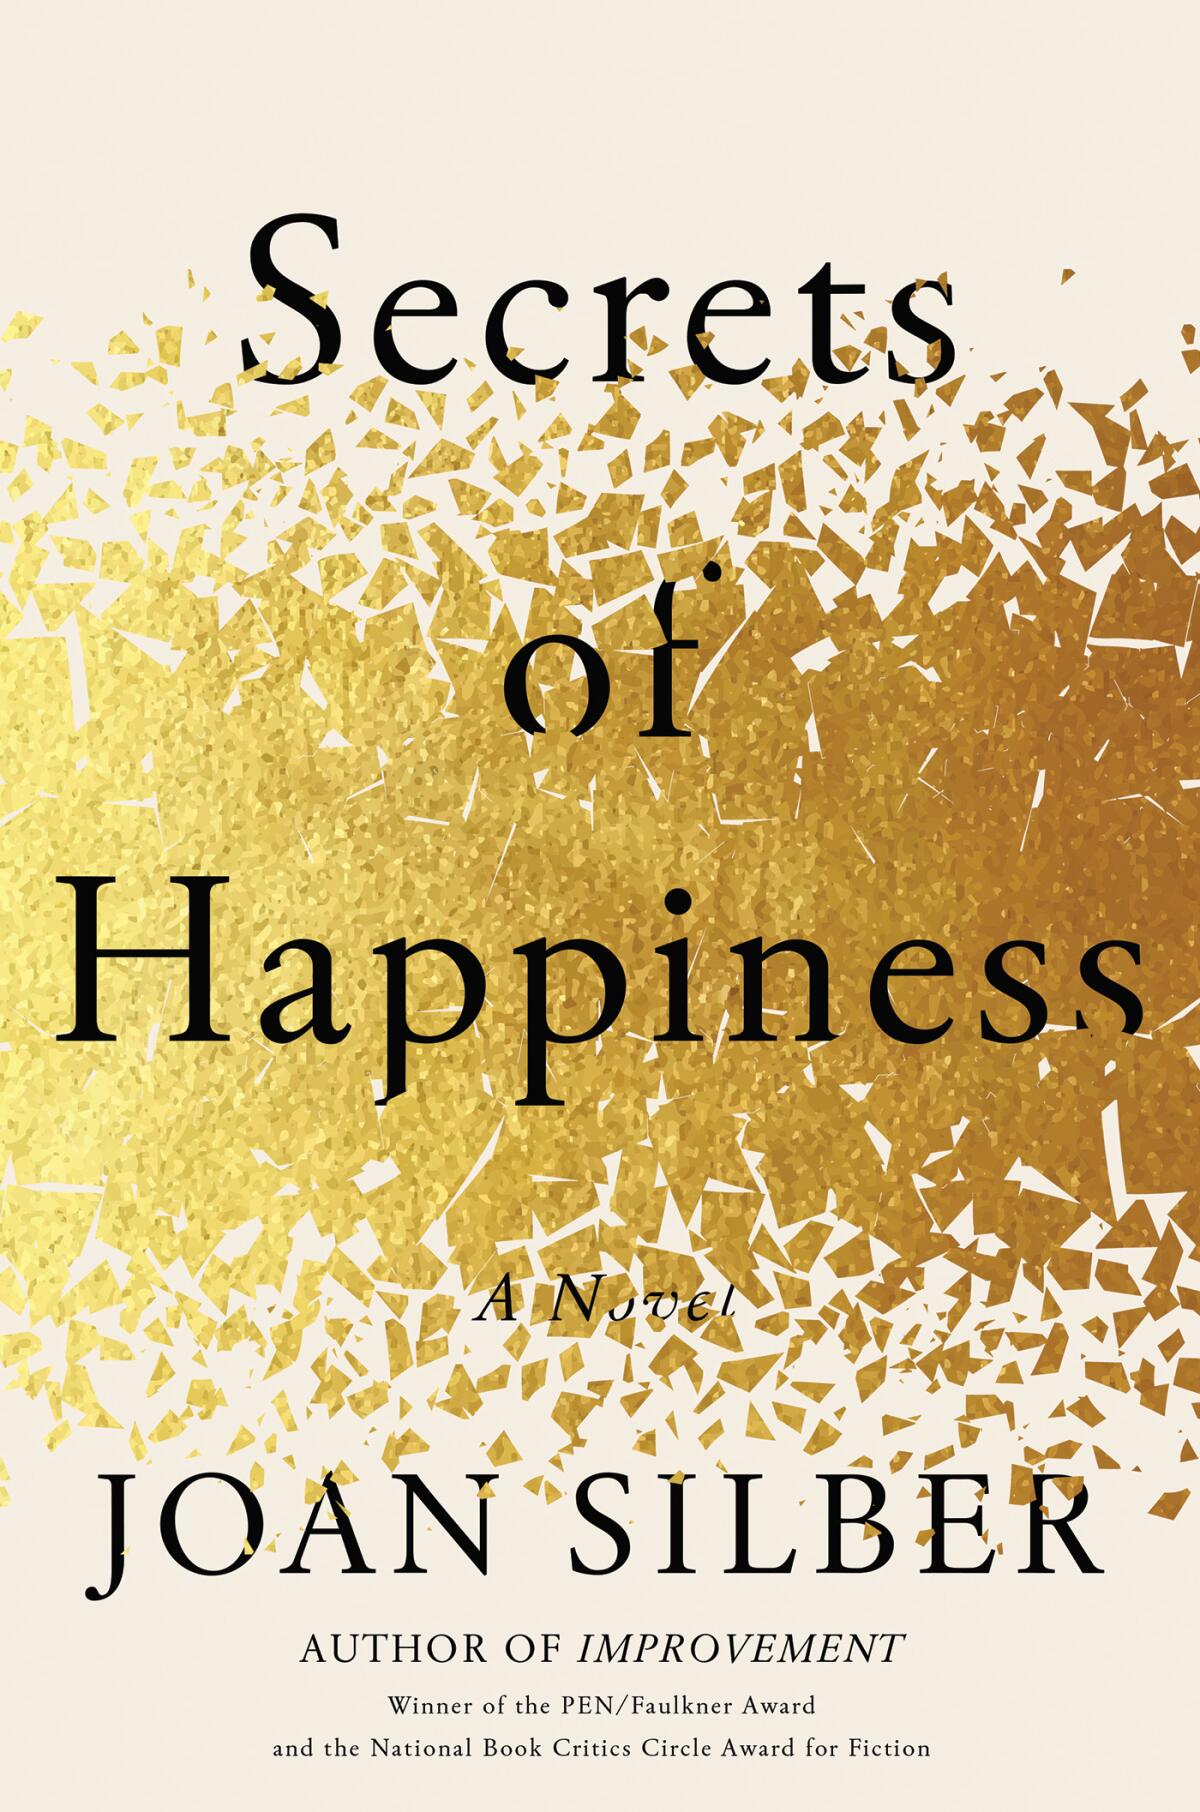 "Secrets of Happiness," by Joan Silber